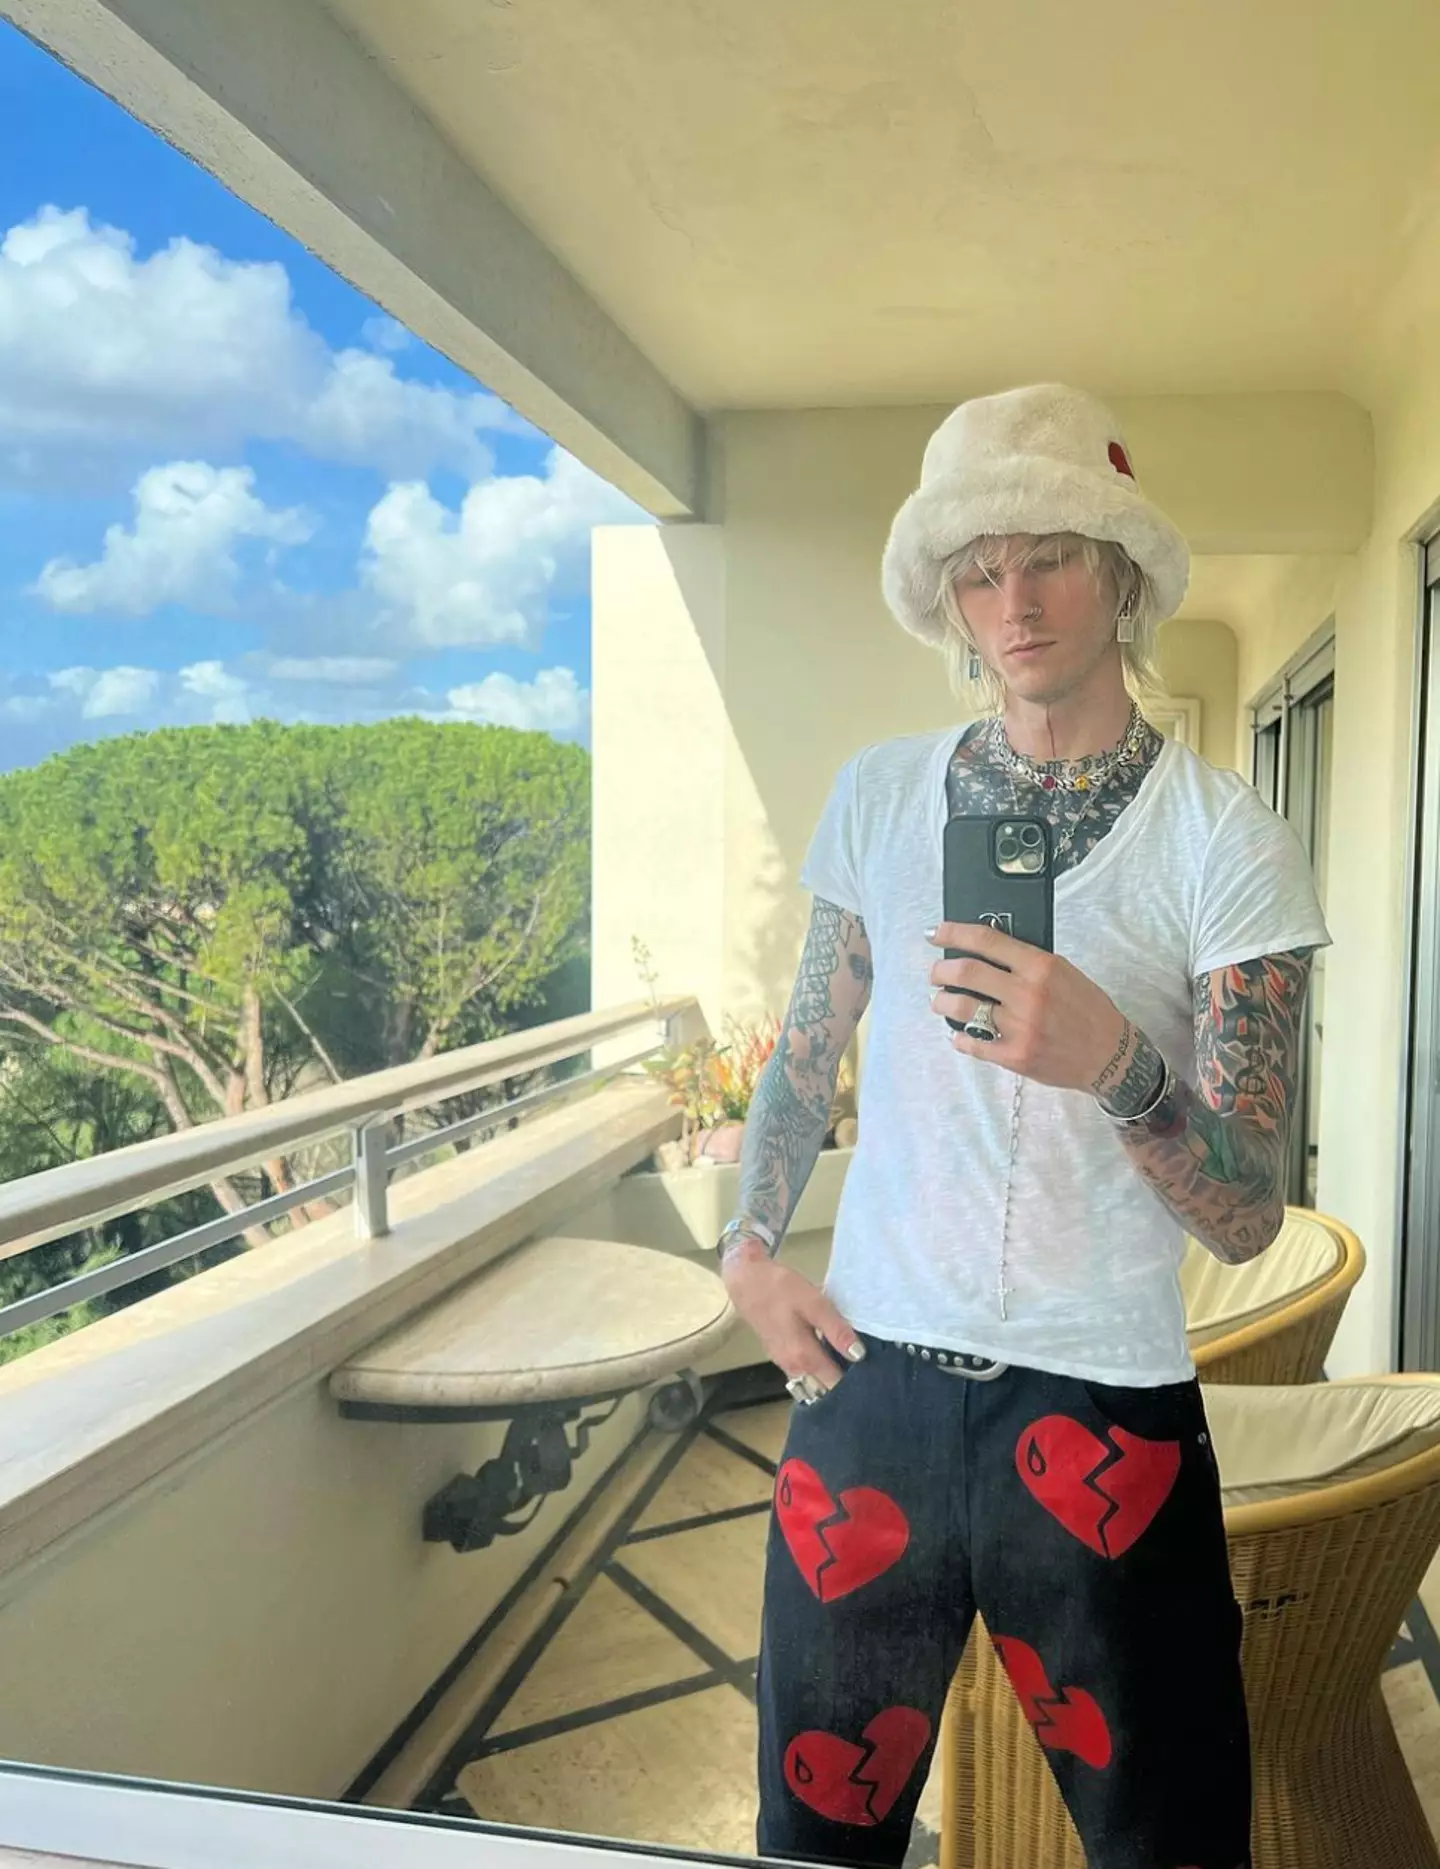 MGK released 'Rap Devil' after Eminem threw shots in his song 'Not Alike'.